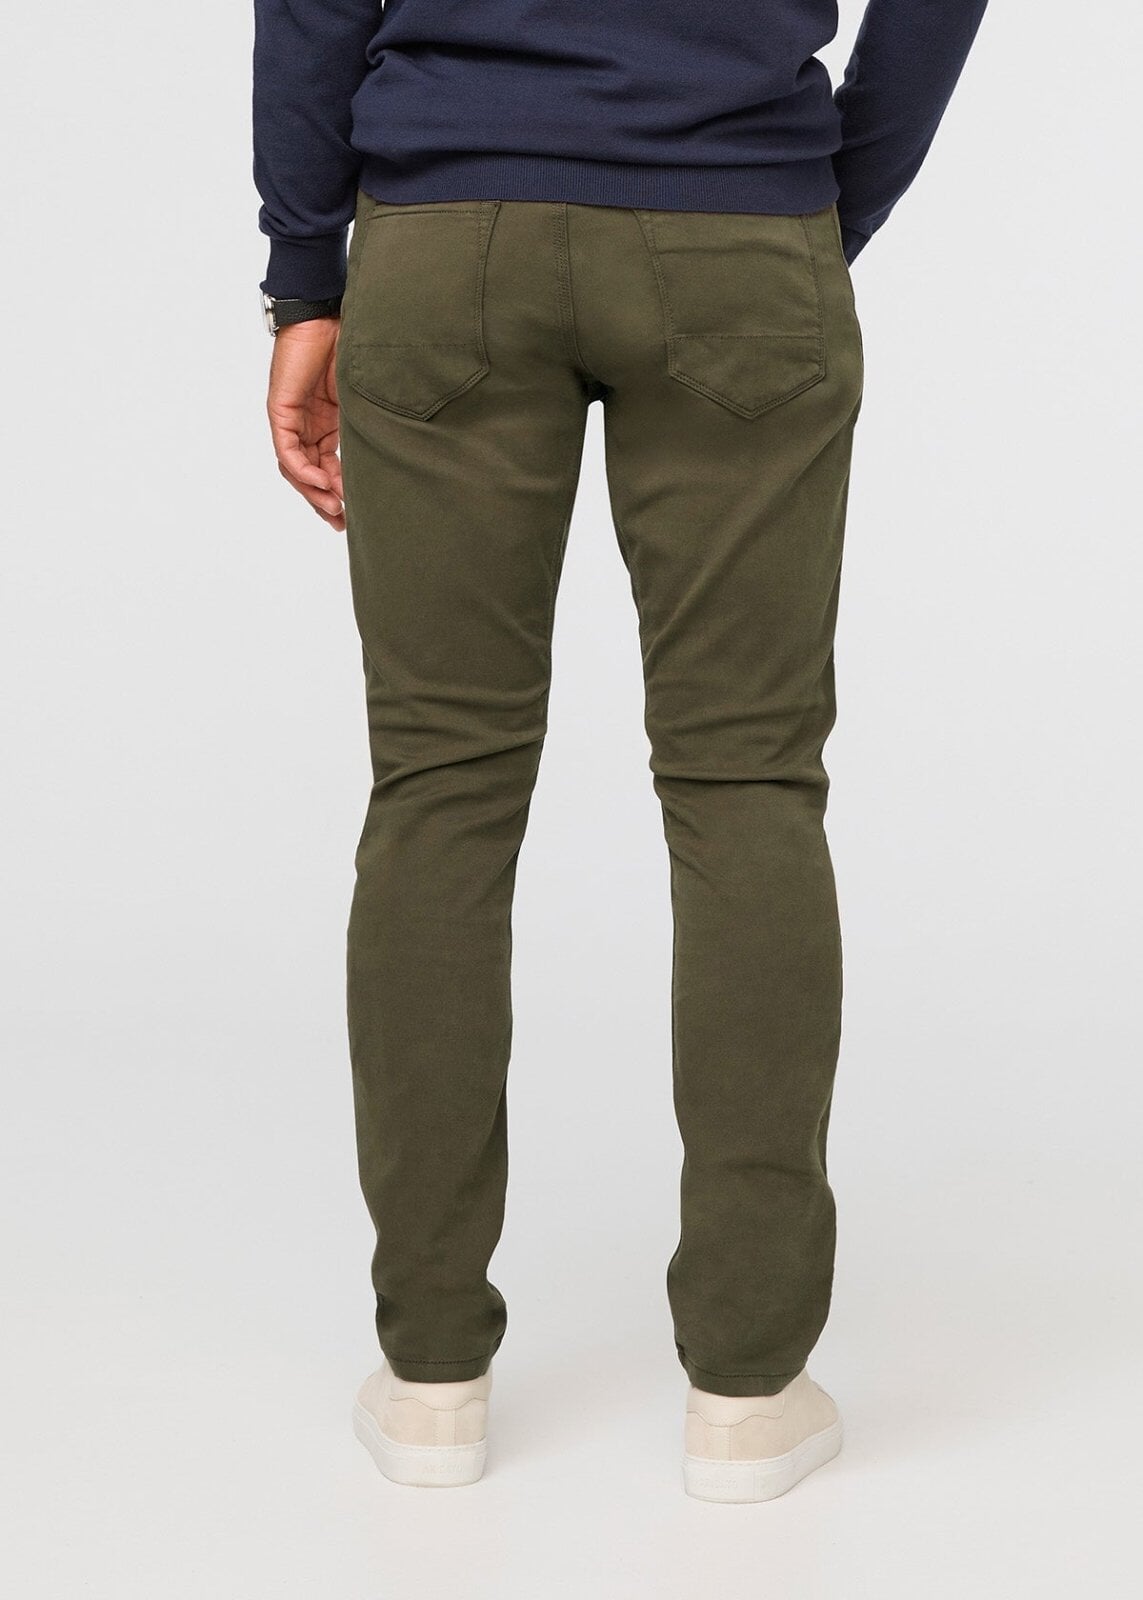 man wearing a army green Relaxed Fit Sweatpant back